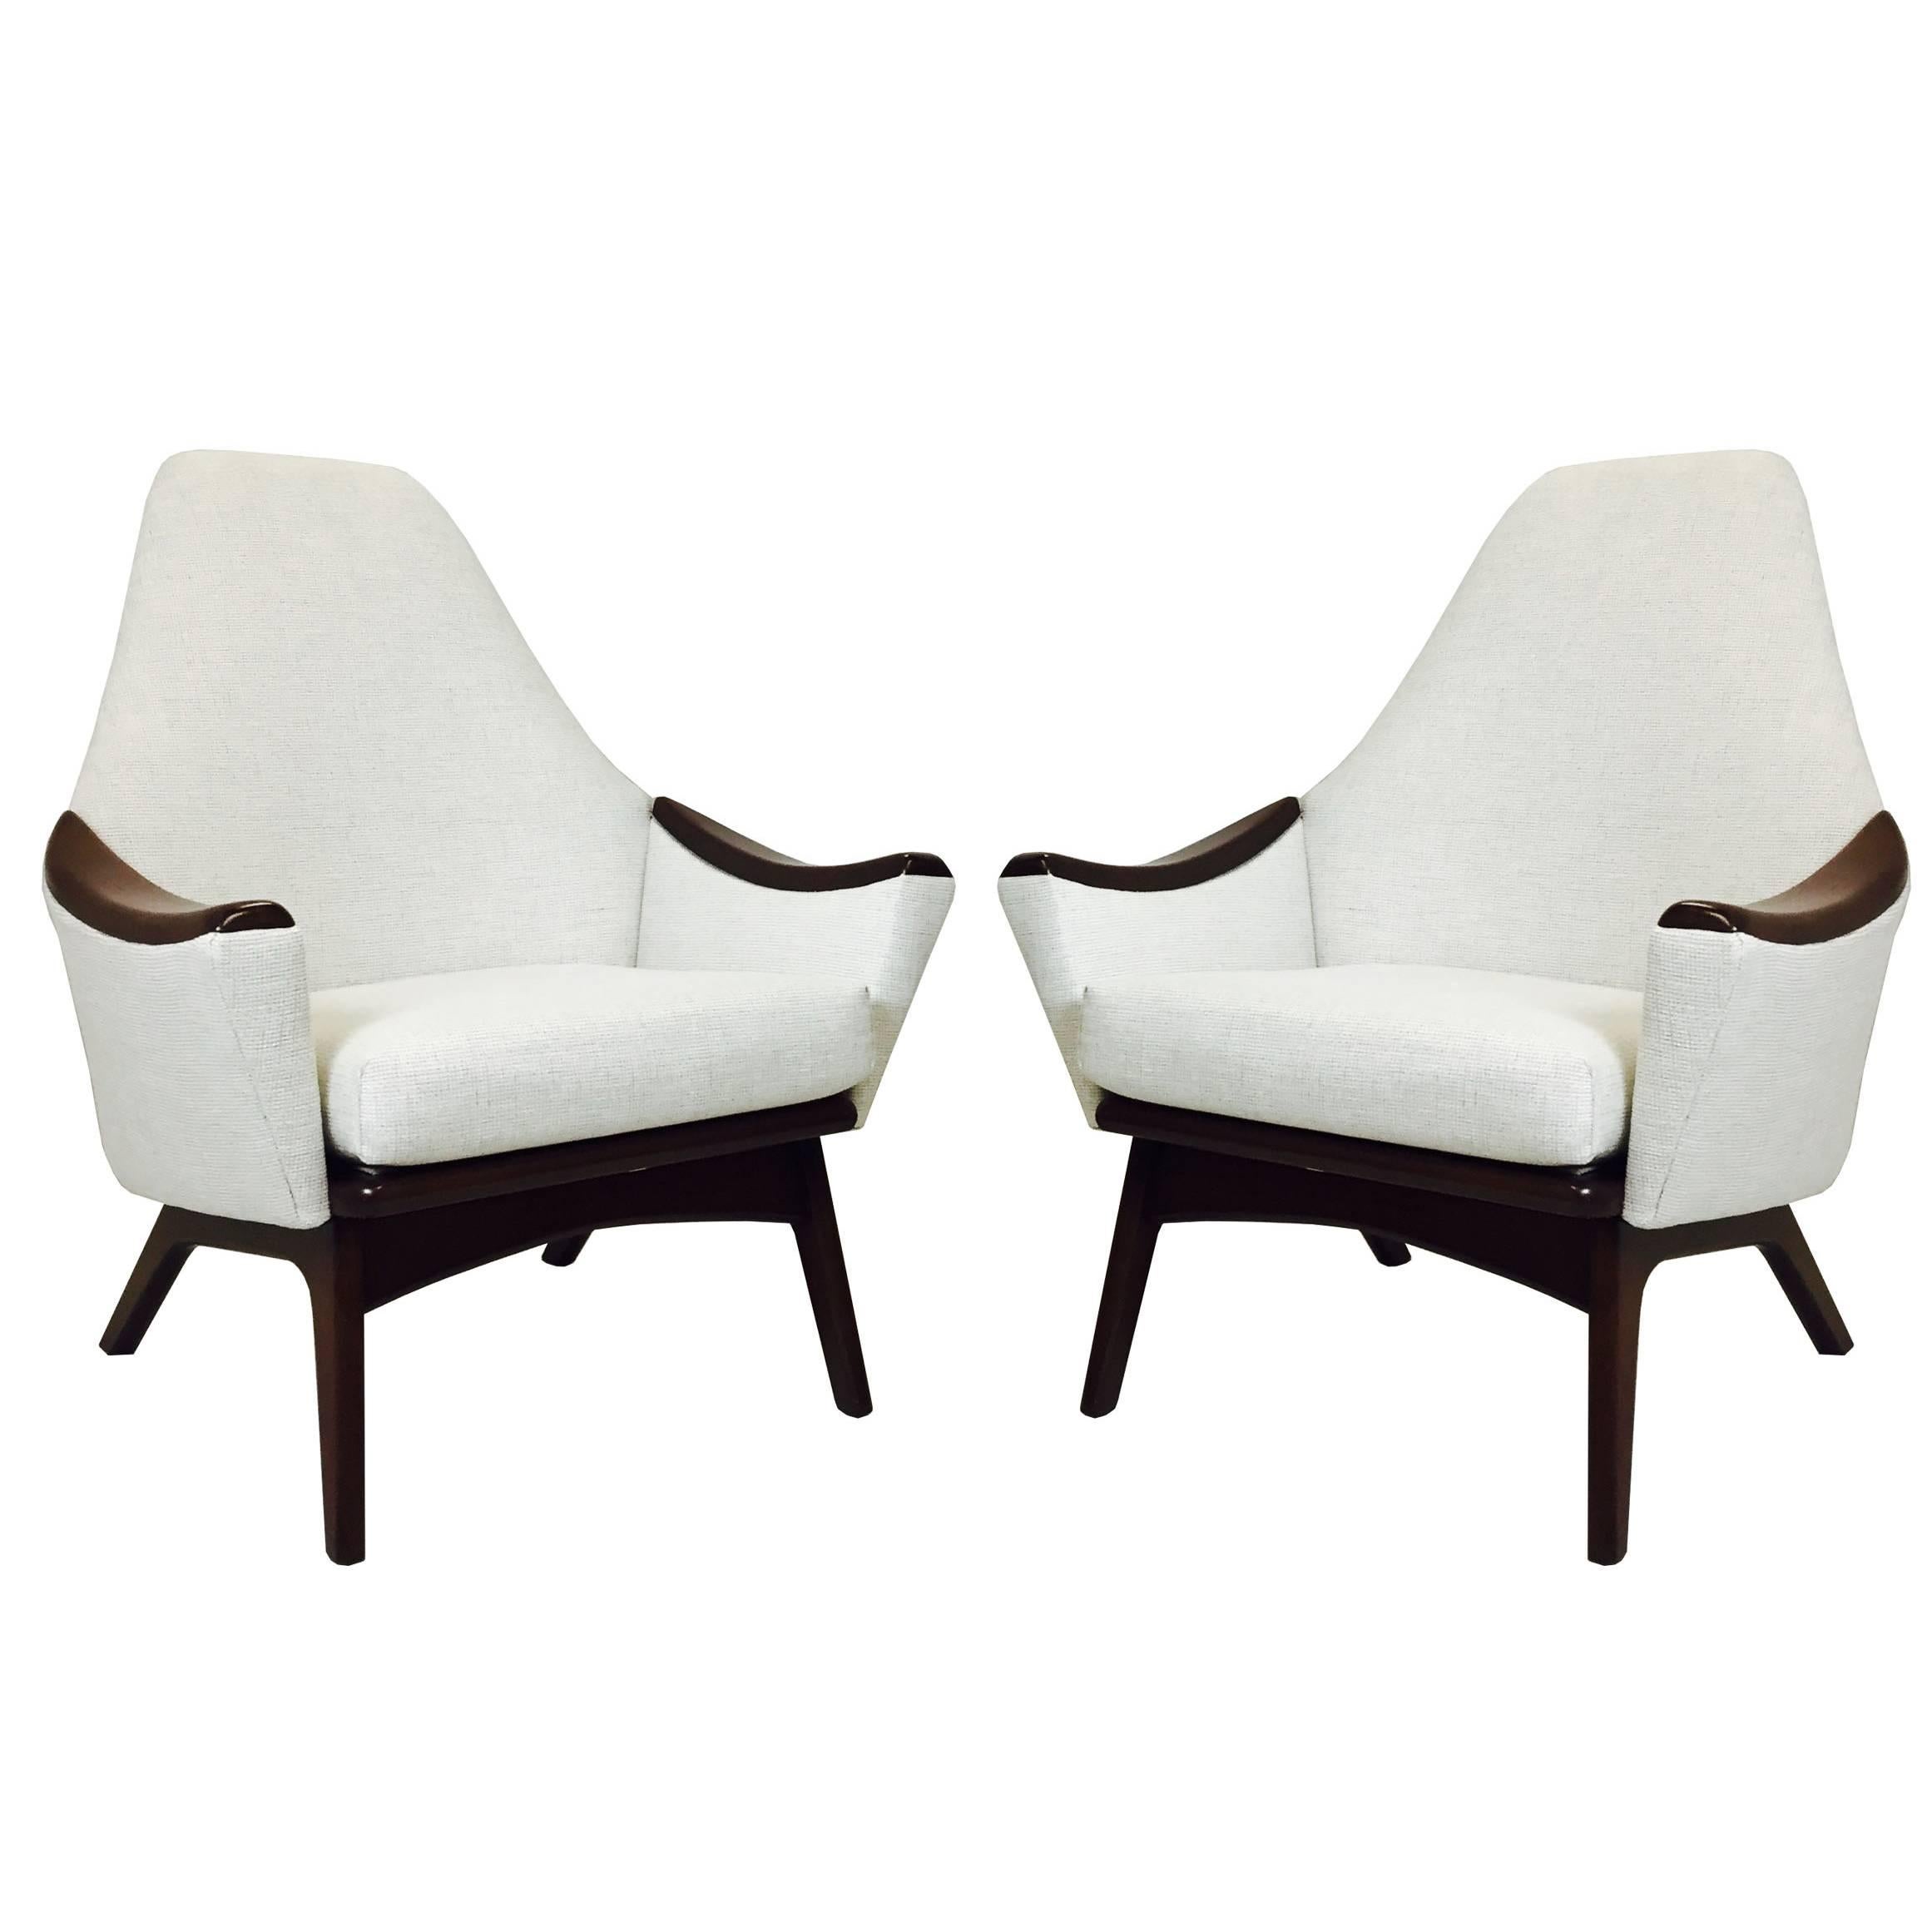 Pair of Adrian Pearsall High Back Lounge Chairs for Craft Associates